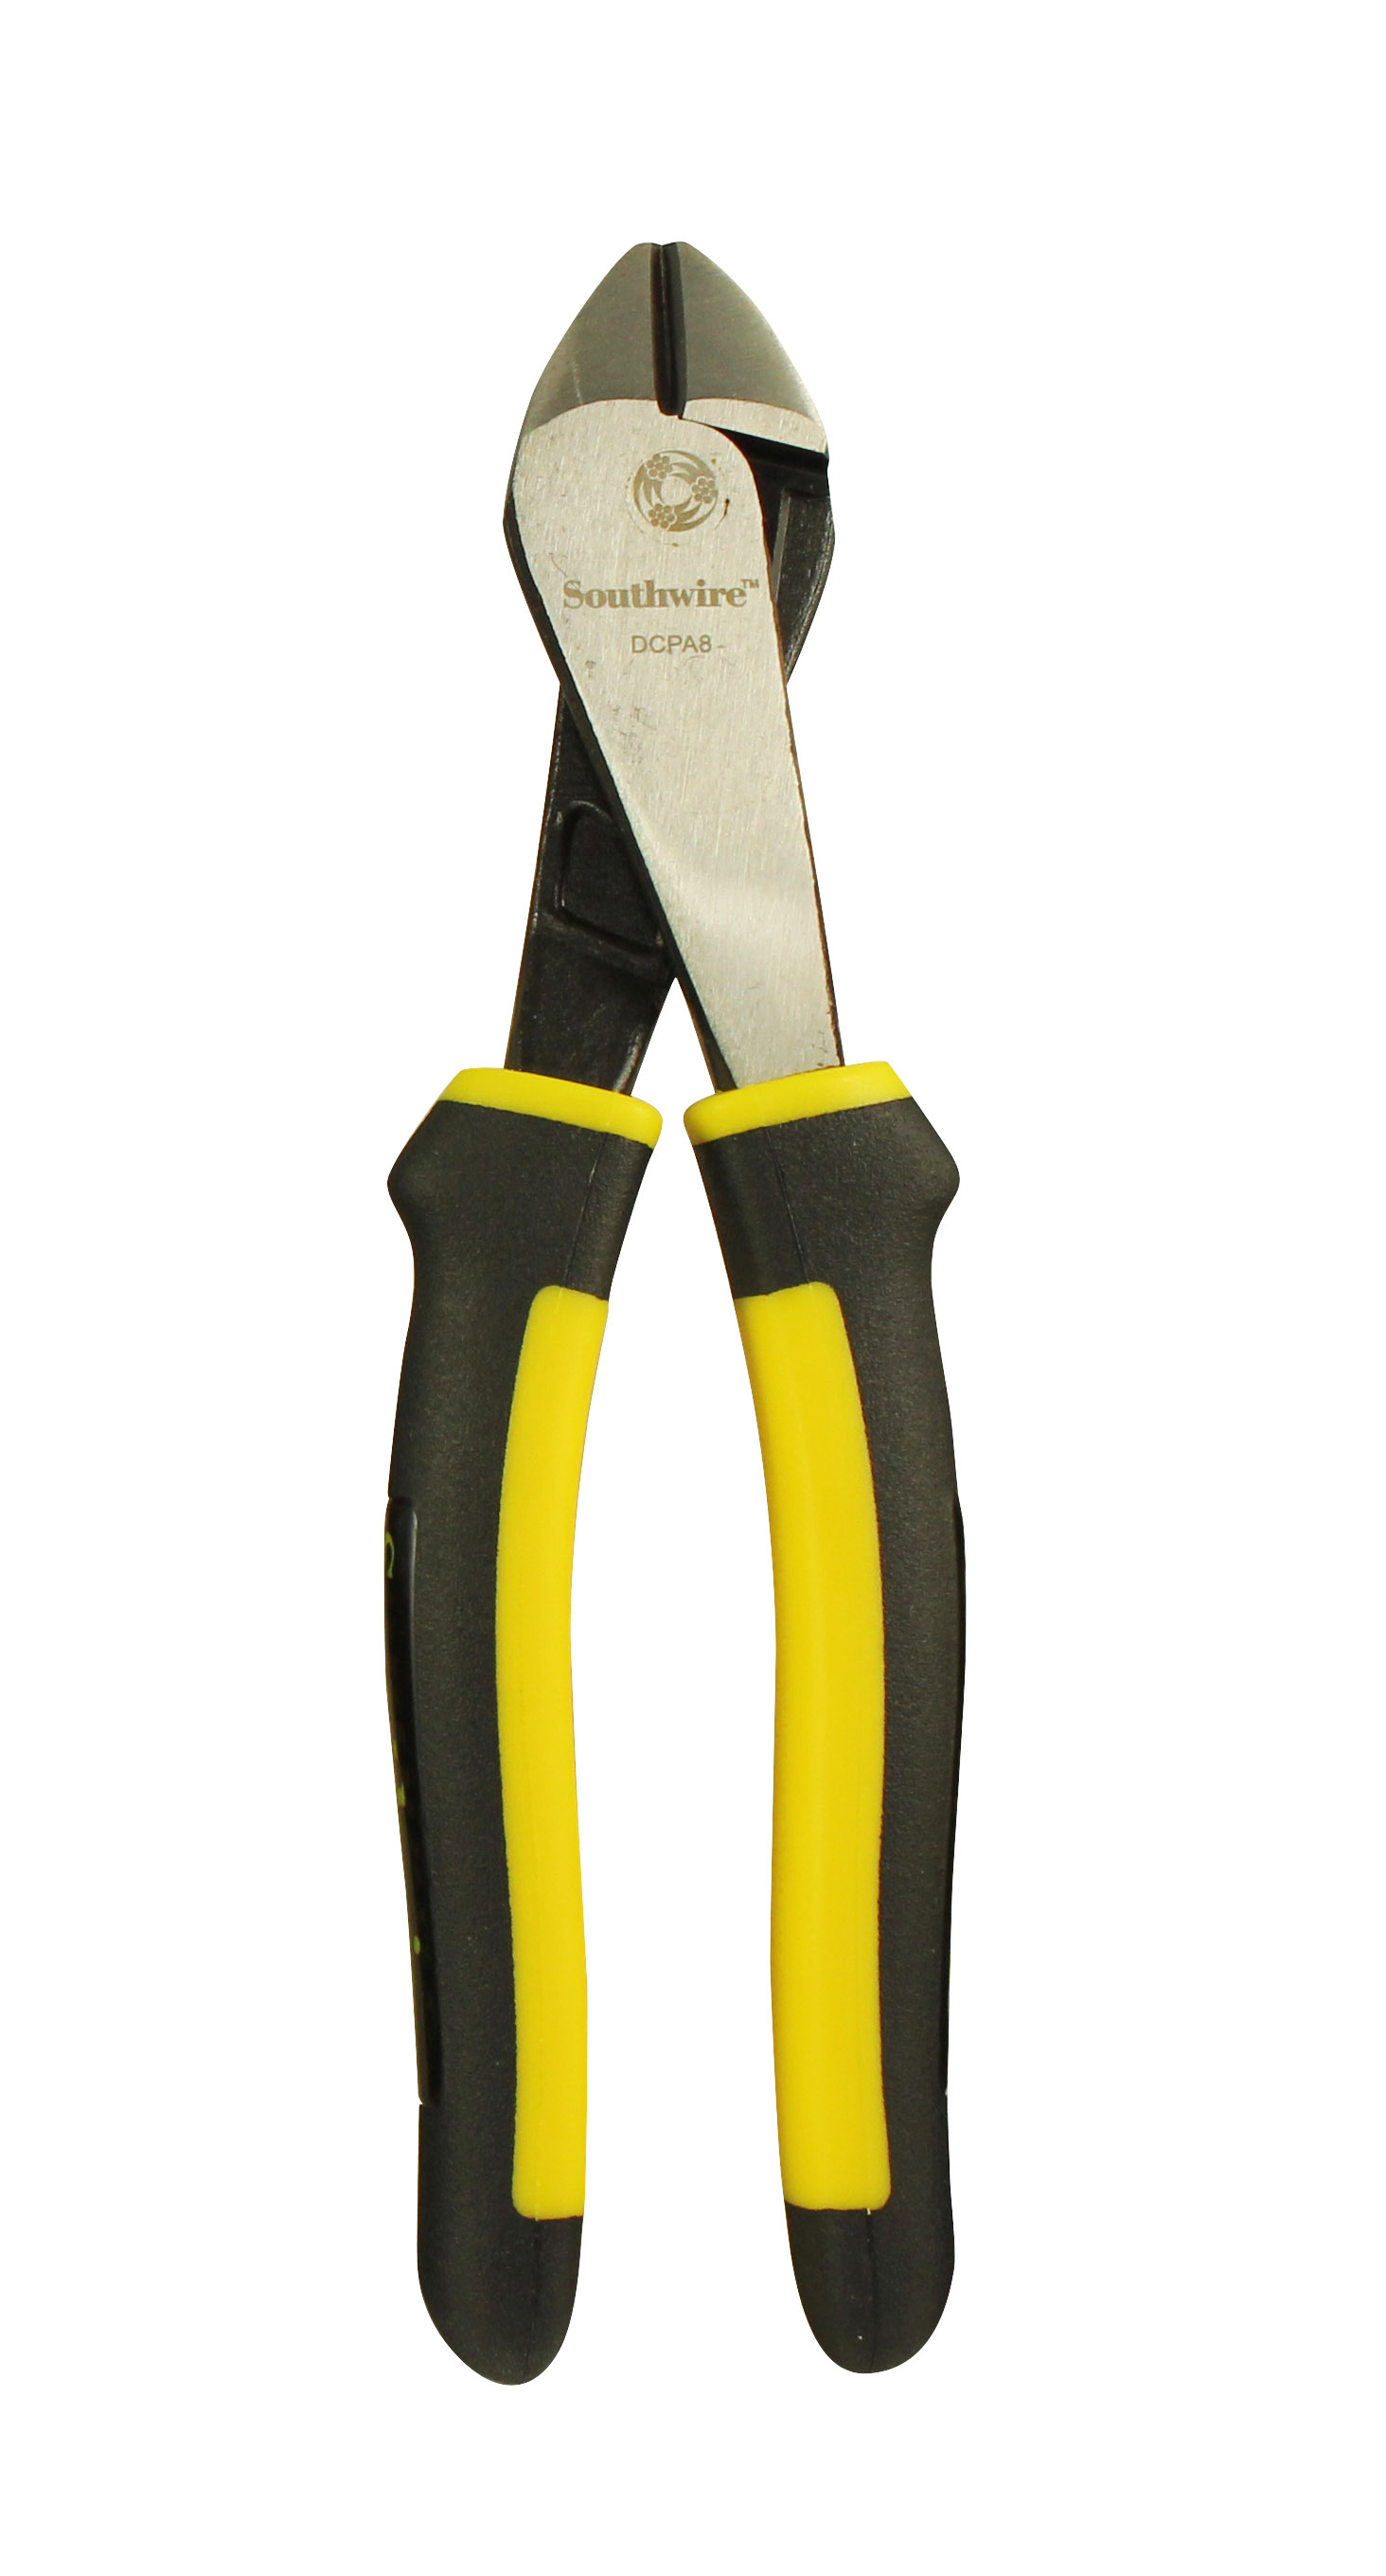 Made from drop forged steel, these 8" angled head diagonal cutting pliers come with a dual material double molded grip. The high-leverage, hot-riveted pivot joint ensures smooth action and no handle wobble. The 14o angled head helps reach hard to rea...